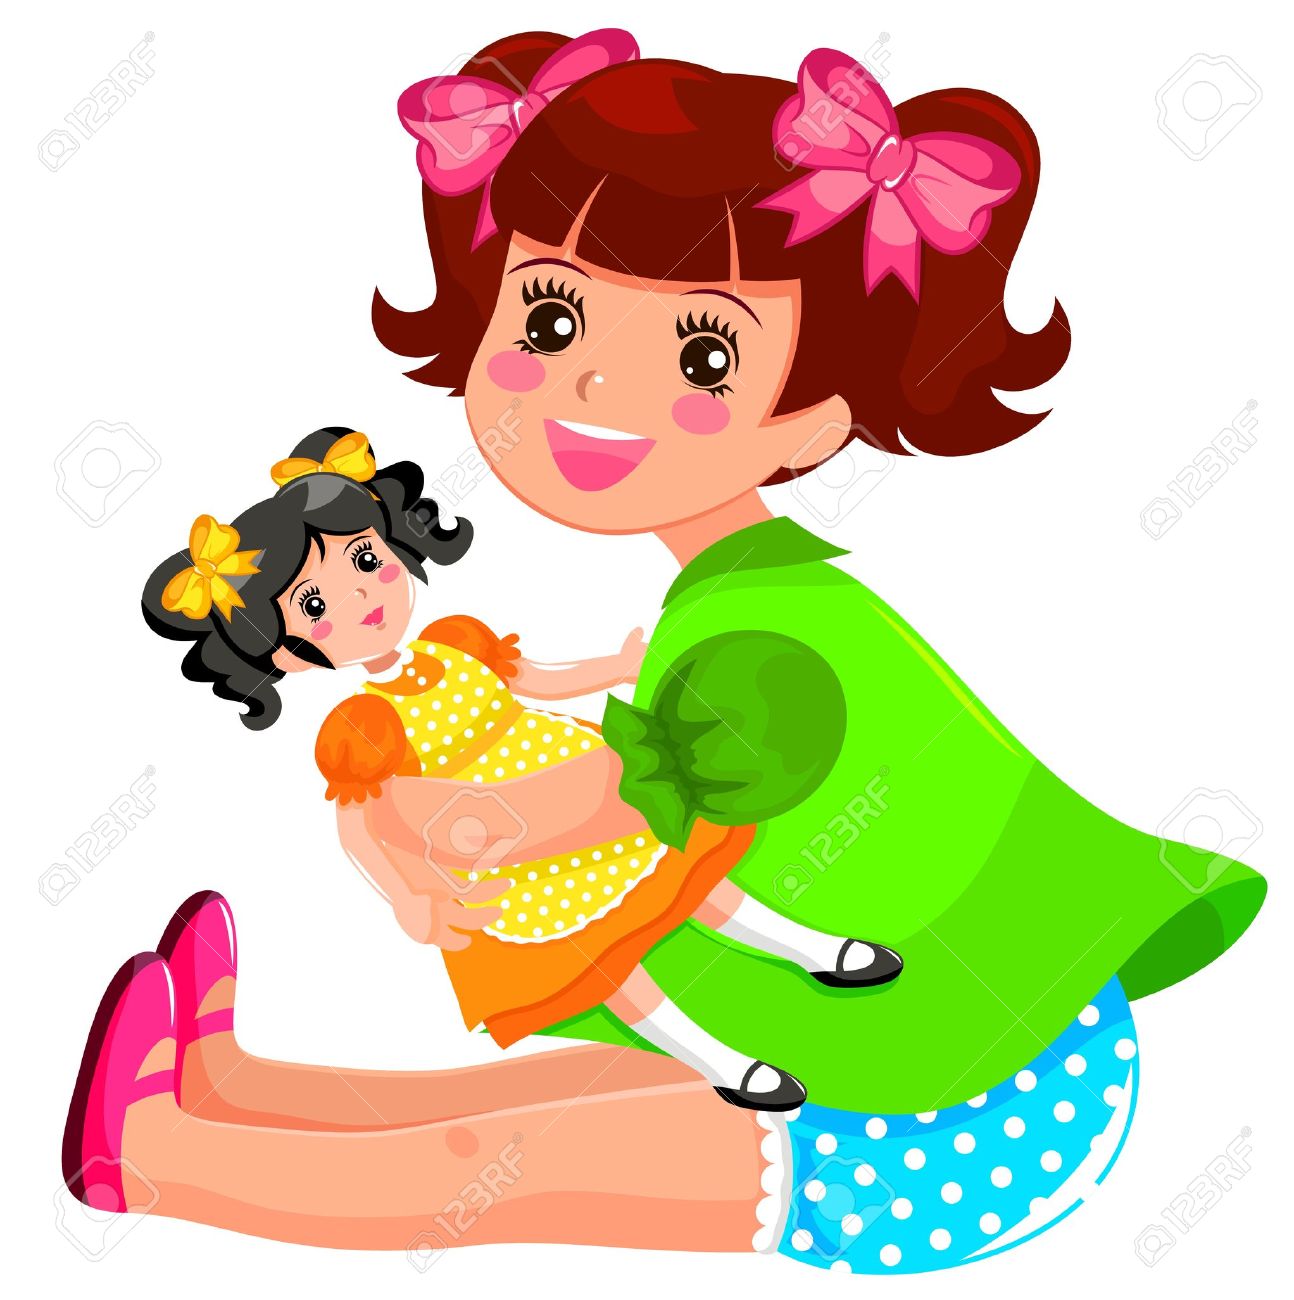 Little girl playing with her doll Stock Vector - 16511442